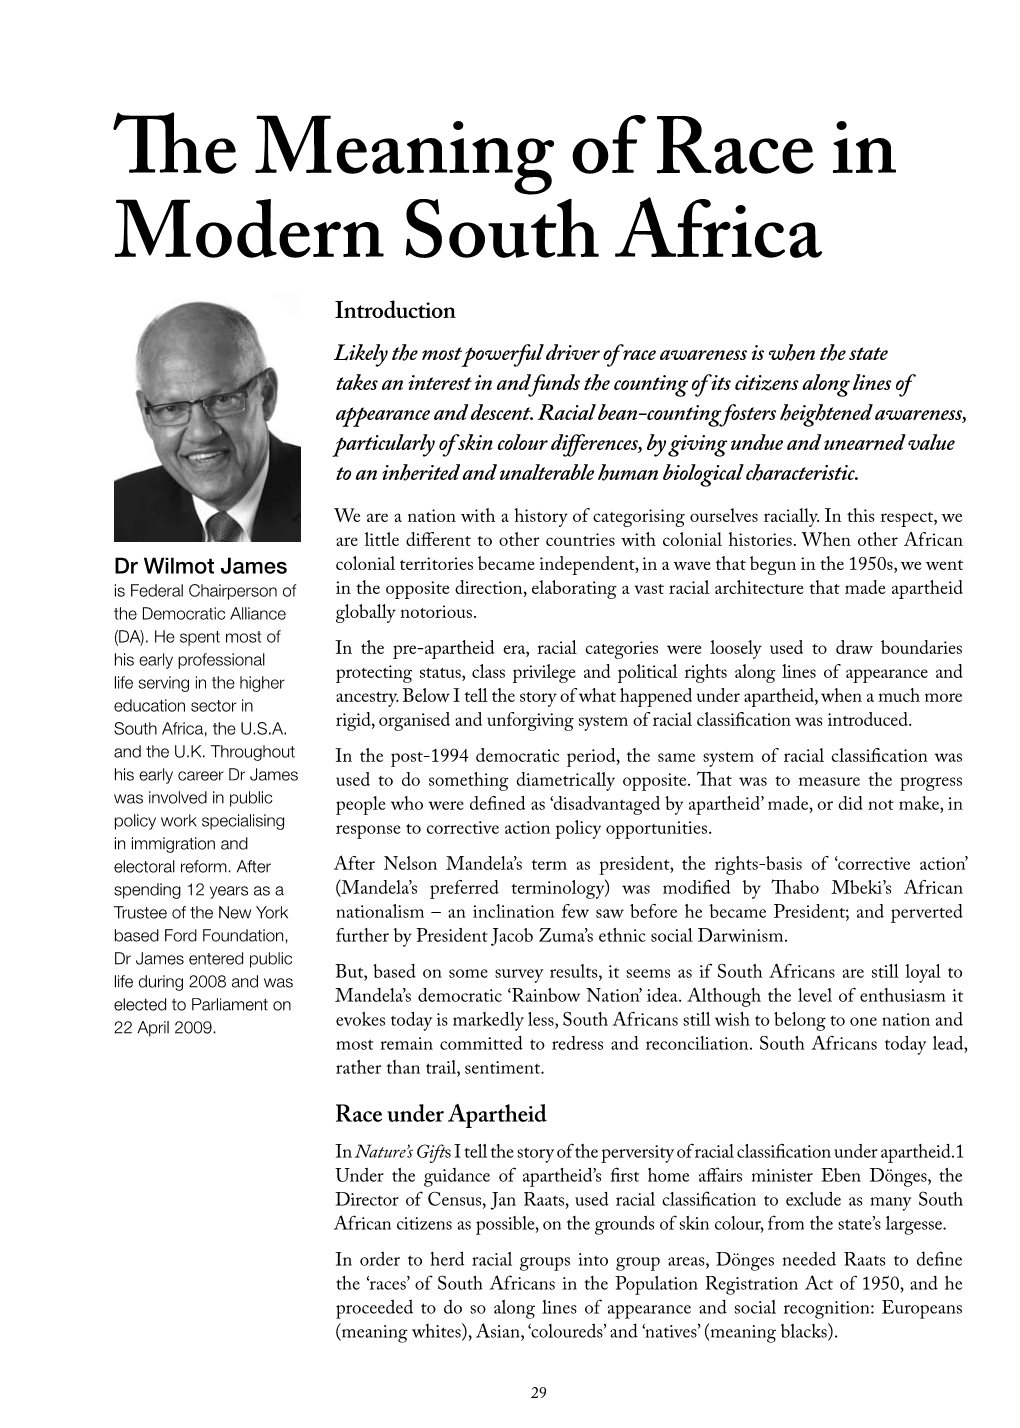 The Meaning of Race in Modern South Africa by Wilmot James